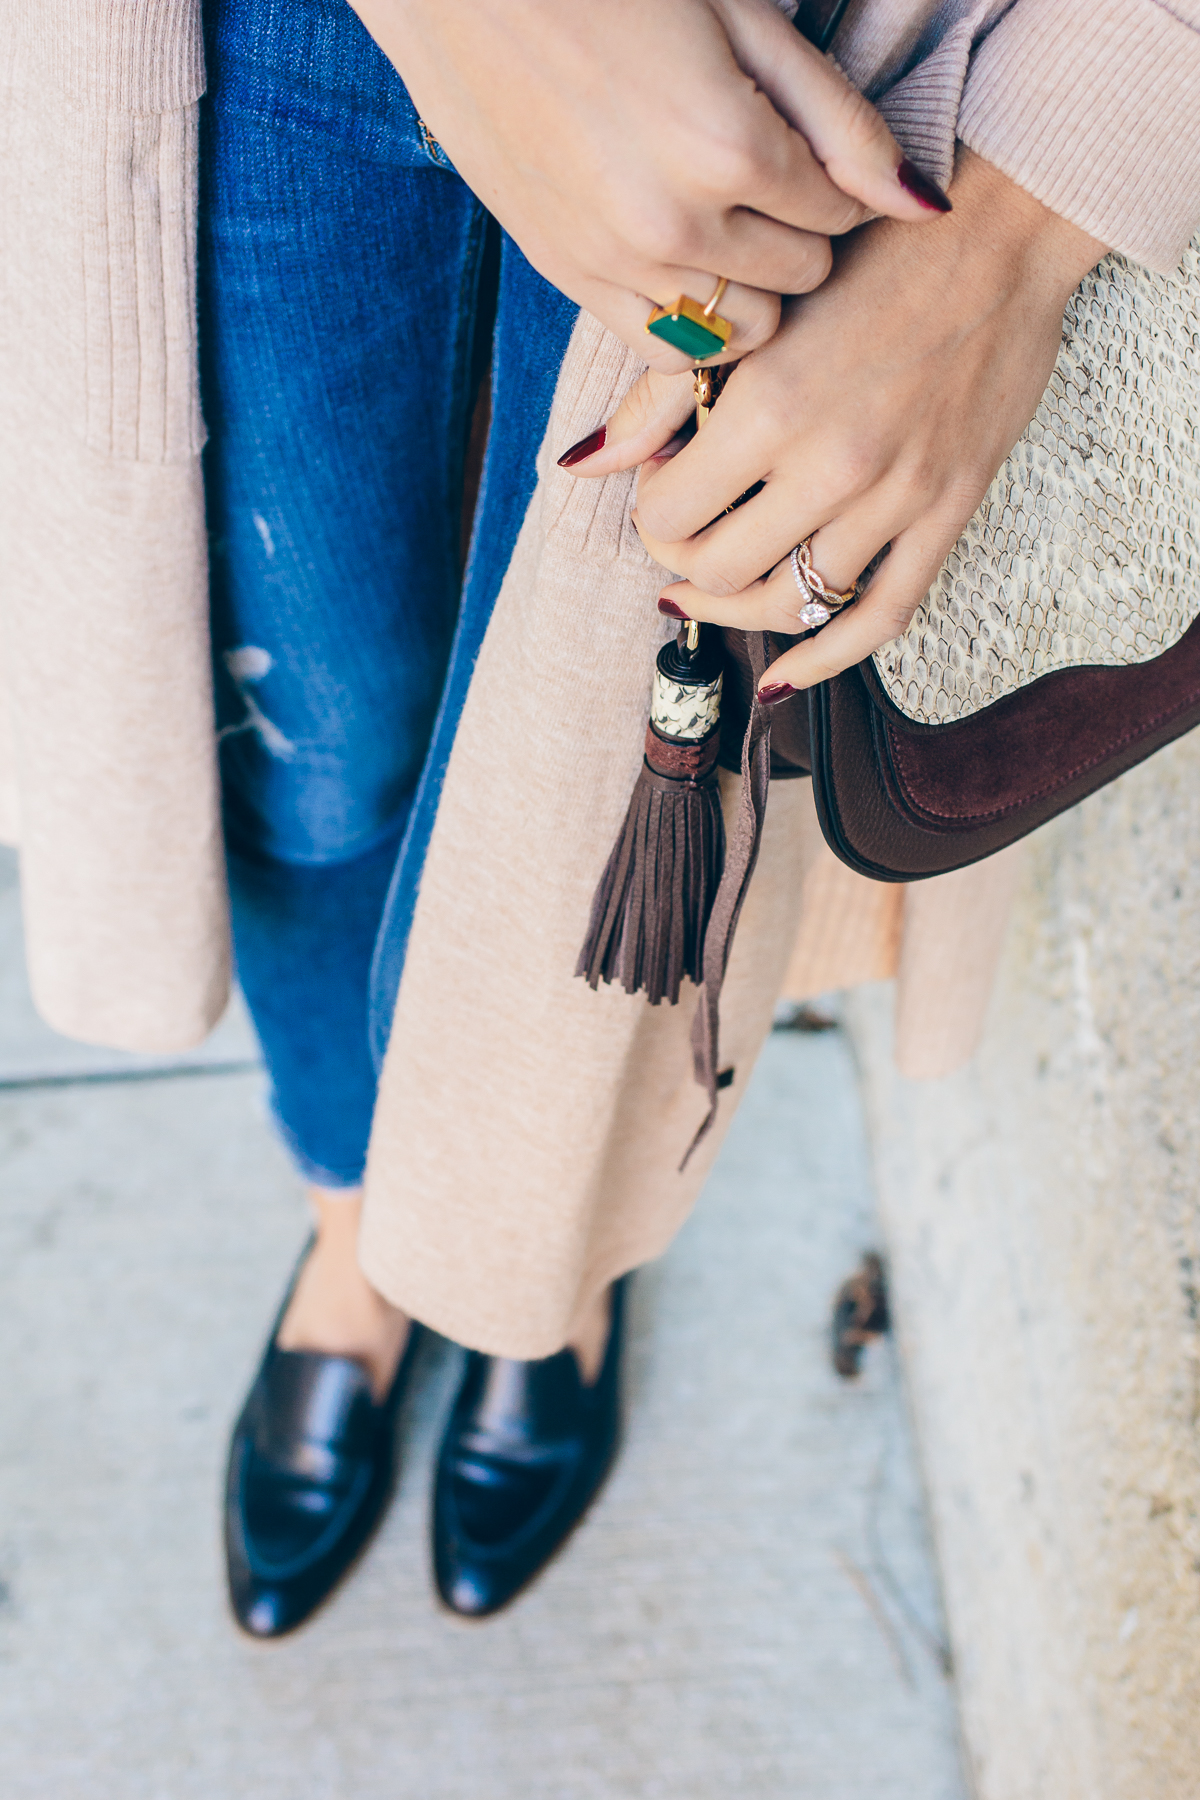 casual winter outfit, long cardigan, loafers, Rebecca Minkoff crossbody — via @TheFoxandShe